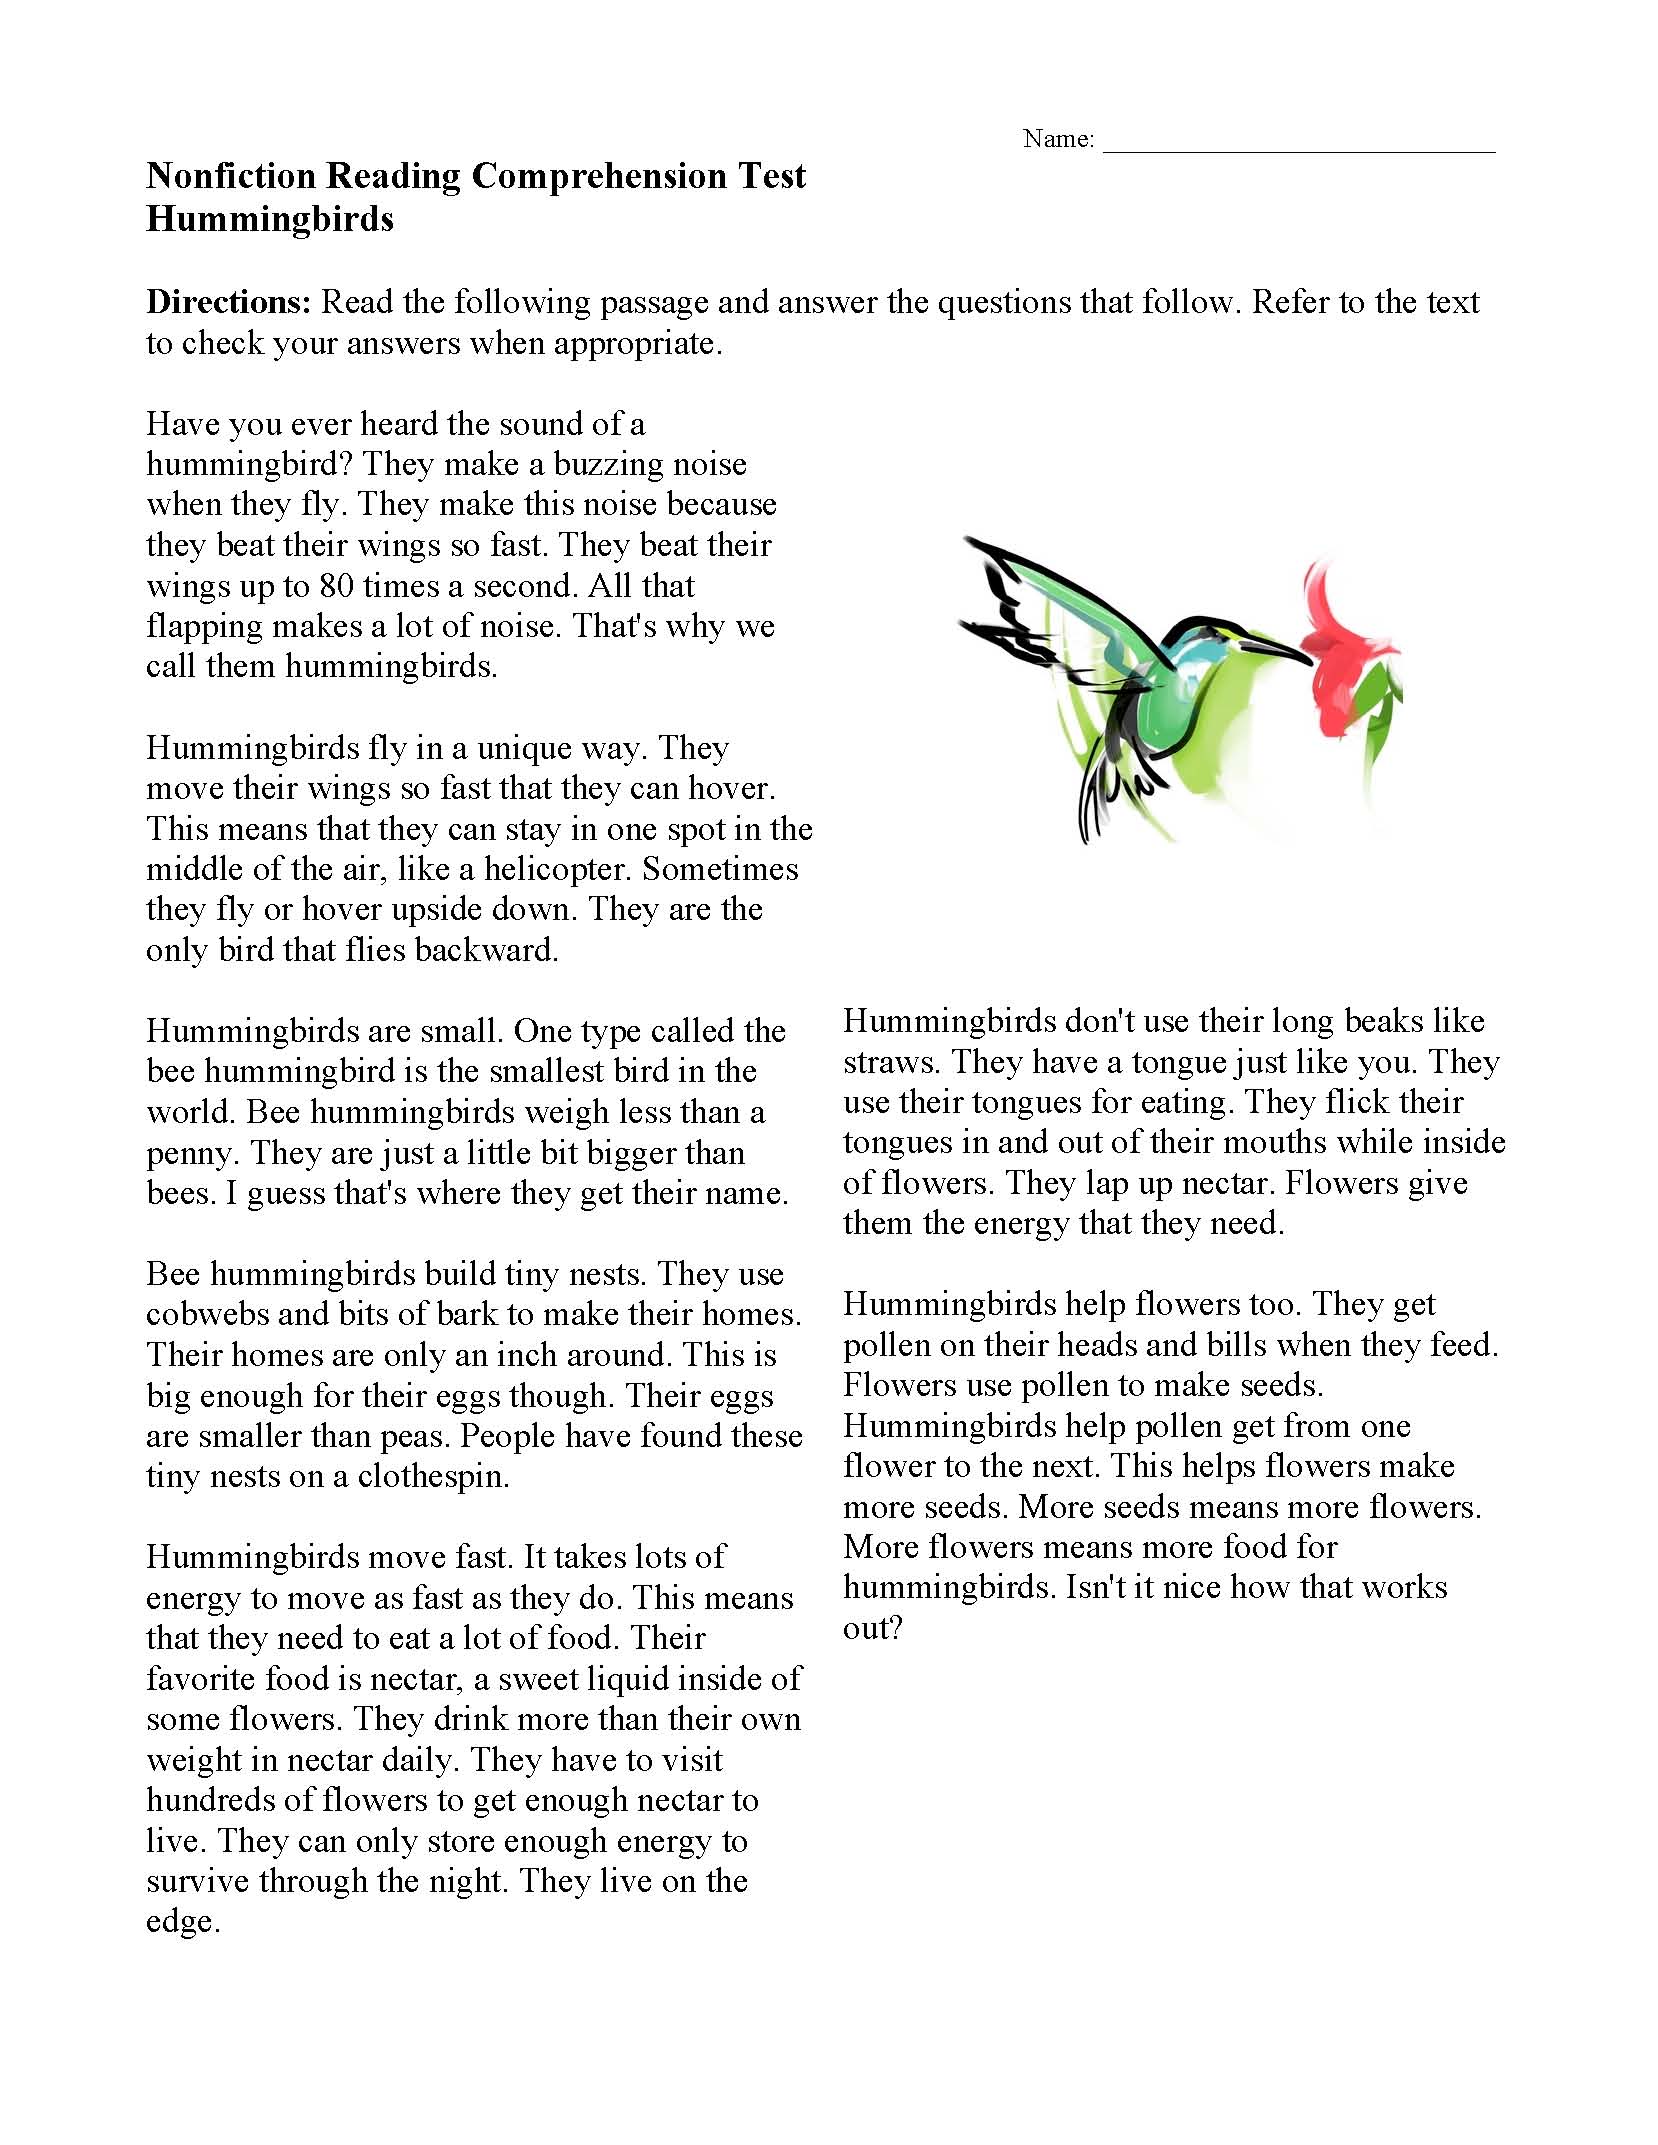 This is a preview image of Hummingbirds. Click on it to enlarge it or view the source file.